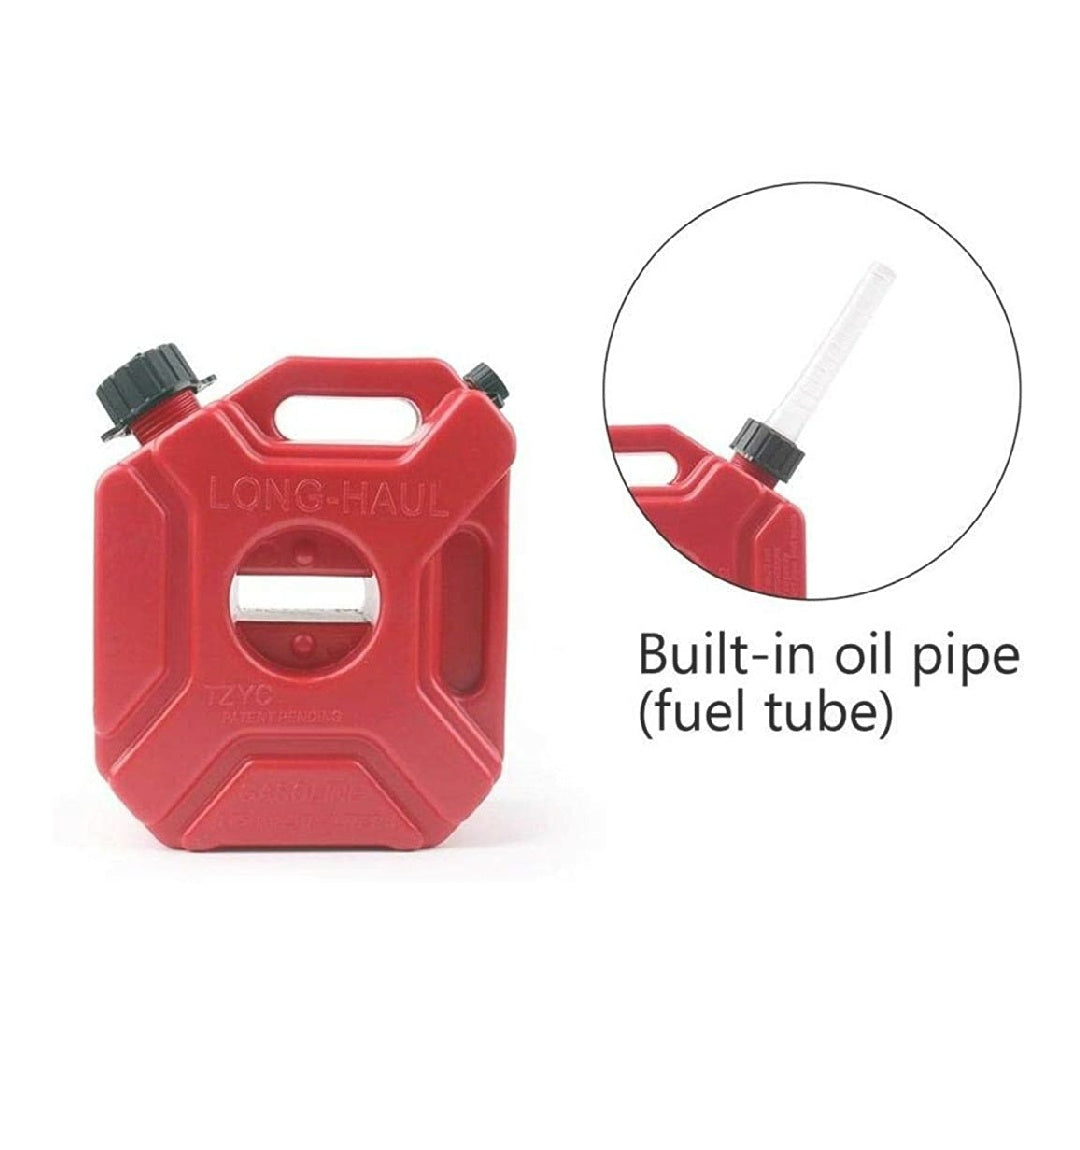 Jerry Can, Diesel,Petrol Fuel Pack Tank for Motorcycle,Cars,Suvs (5 LTR)